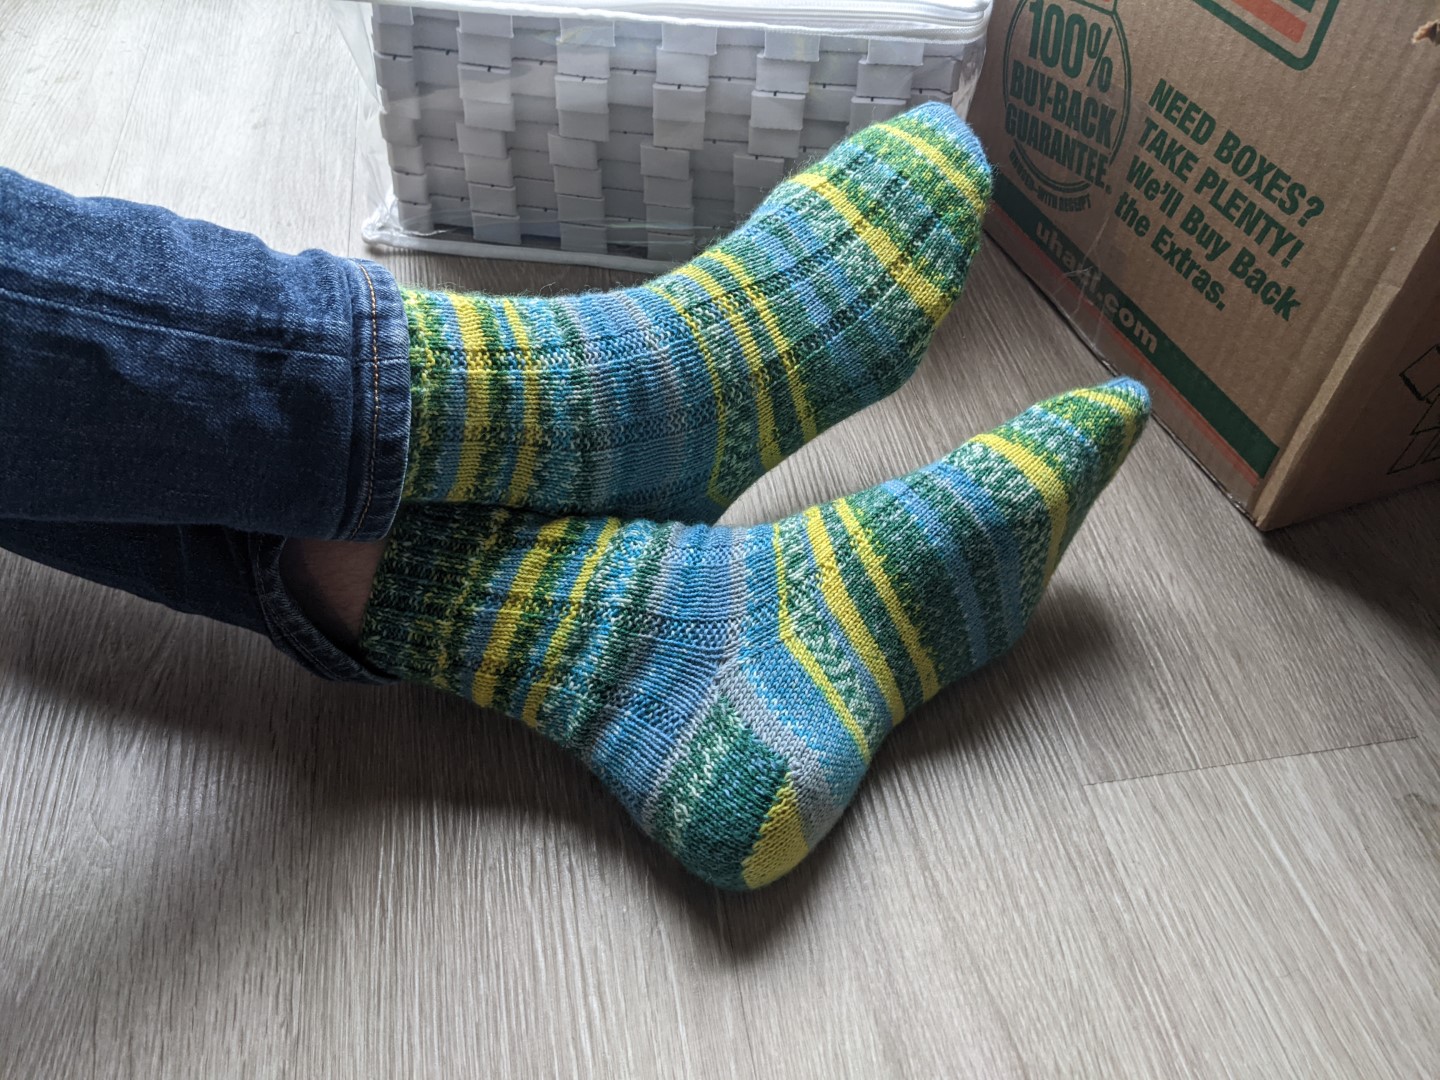 Feet in a pair of colorful socks. They are identically striped and quickly vary between yellow, green, blue, white, and gray.